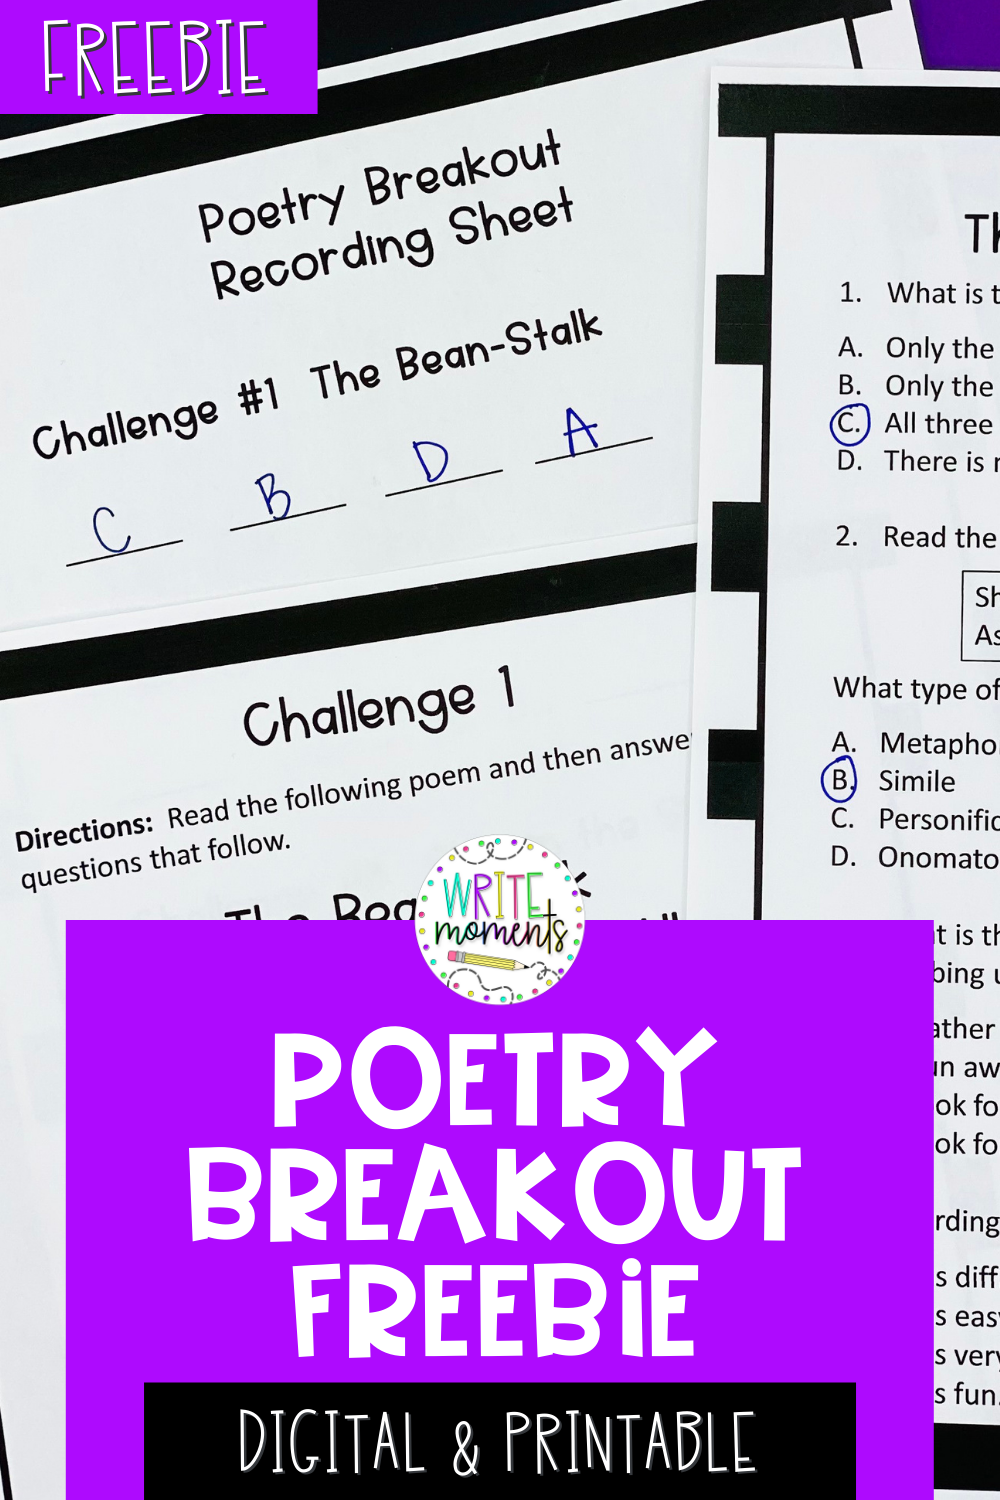 FREE Poetry Breakout